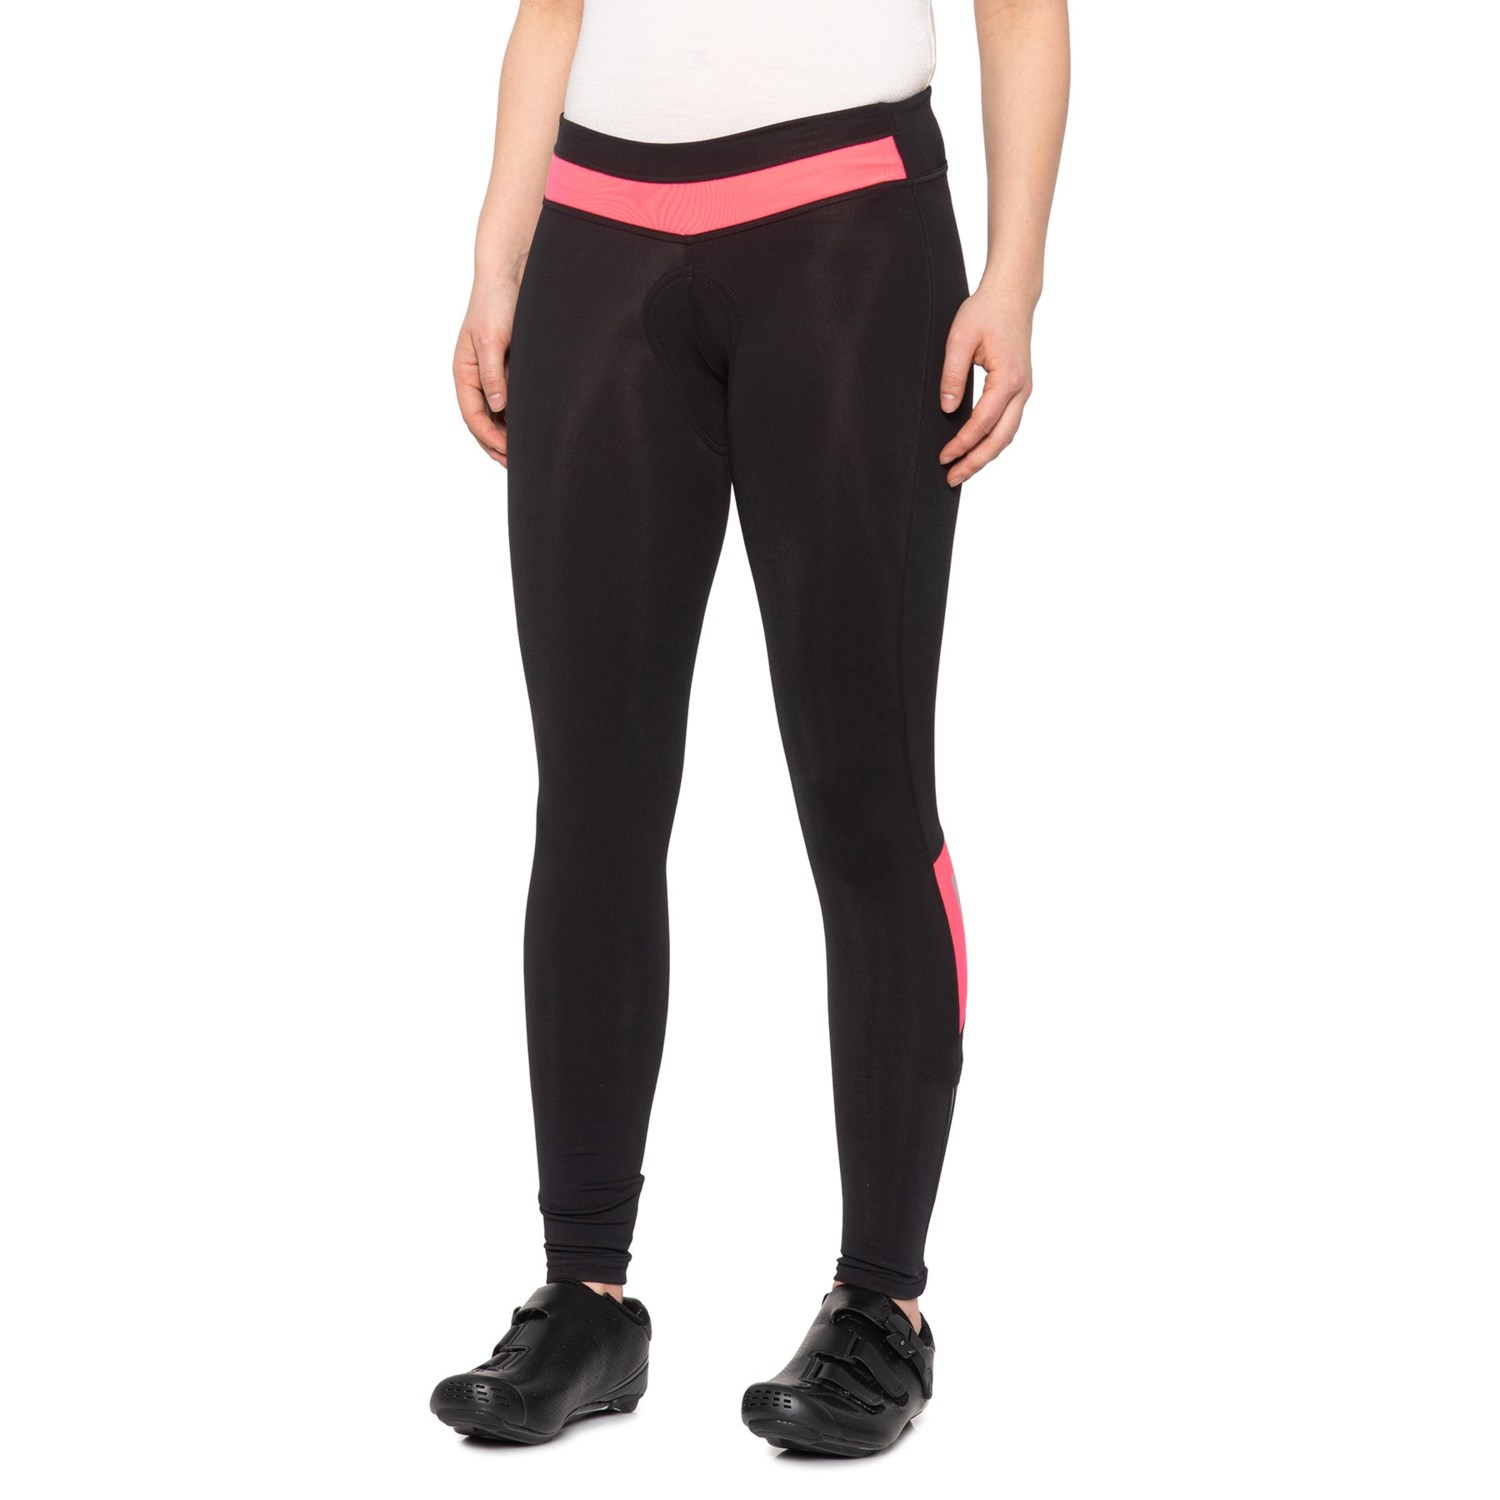 https://i.stpost.com/pearl-izumi-pursuit-thermal-cycling-tights-for-women-in-black-screaming-pink~p~950yy_01~1500.2.jpg